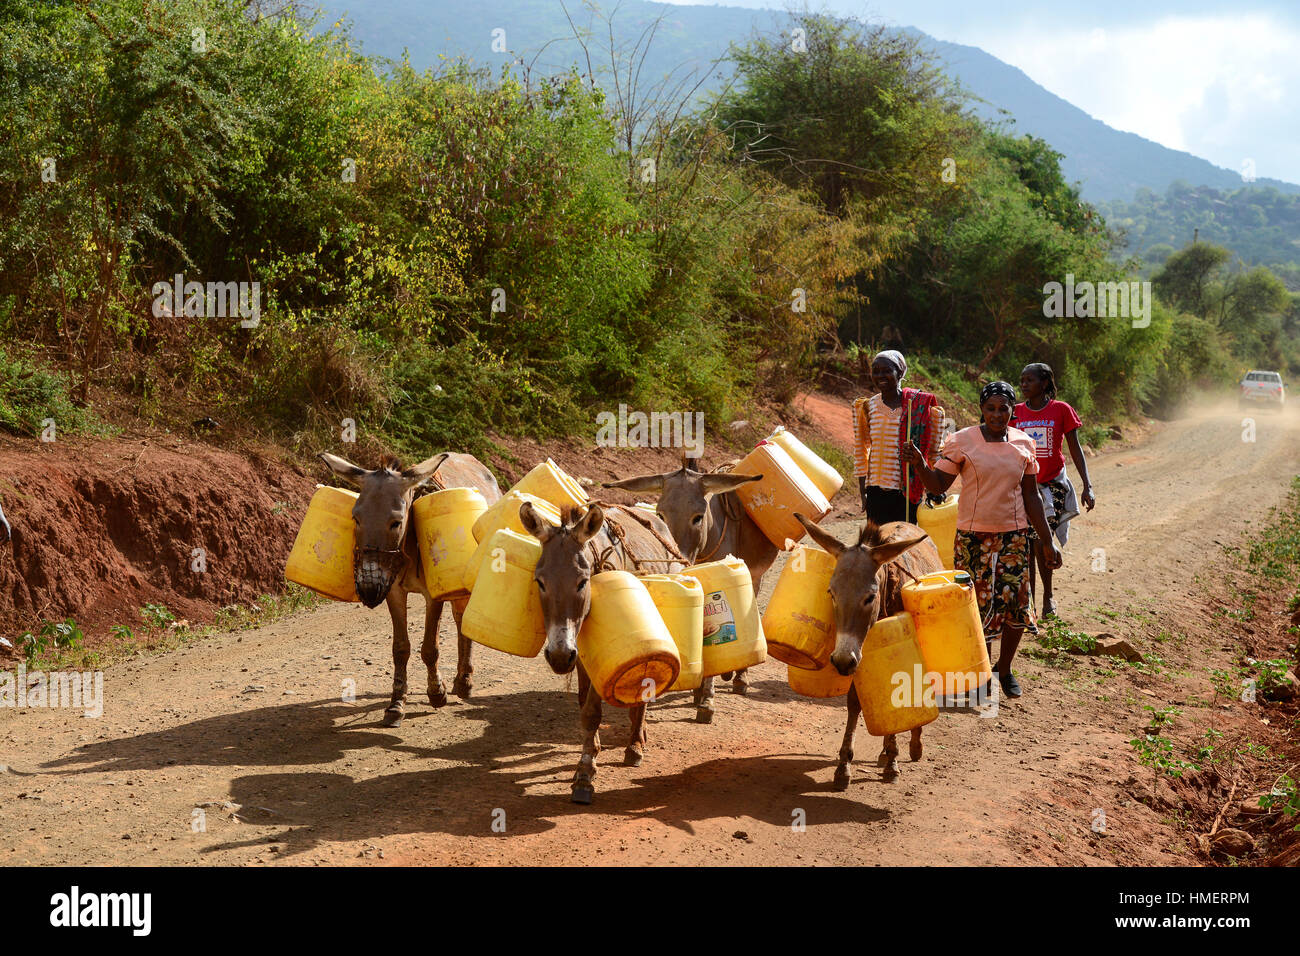 KENIA, Mount Kenya East , extreme drought due to lack of rain has caused massive water problems, villager transport water with donkeys over long distances Stock Photo